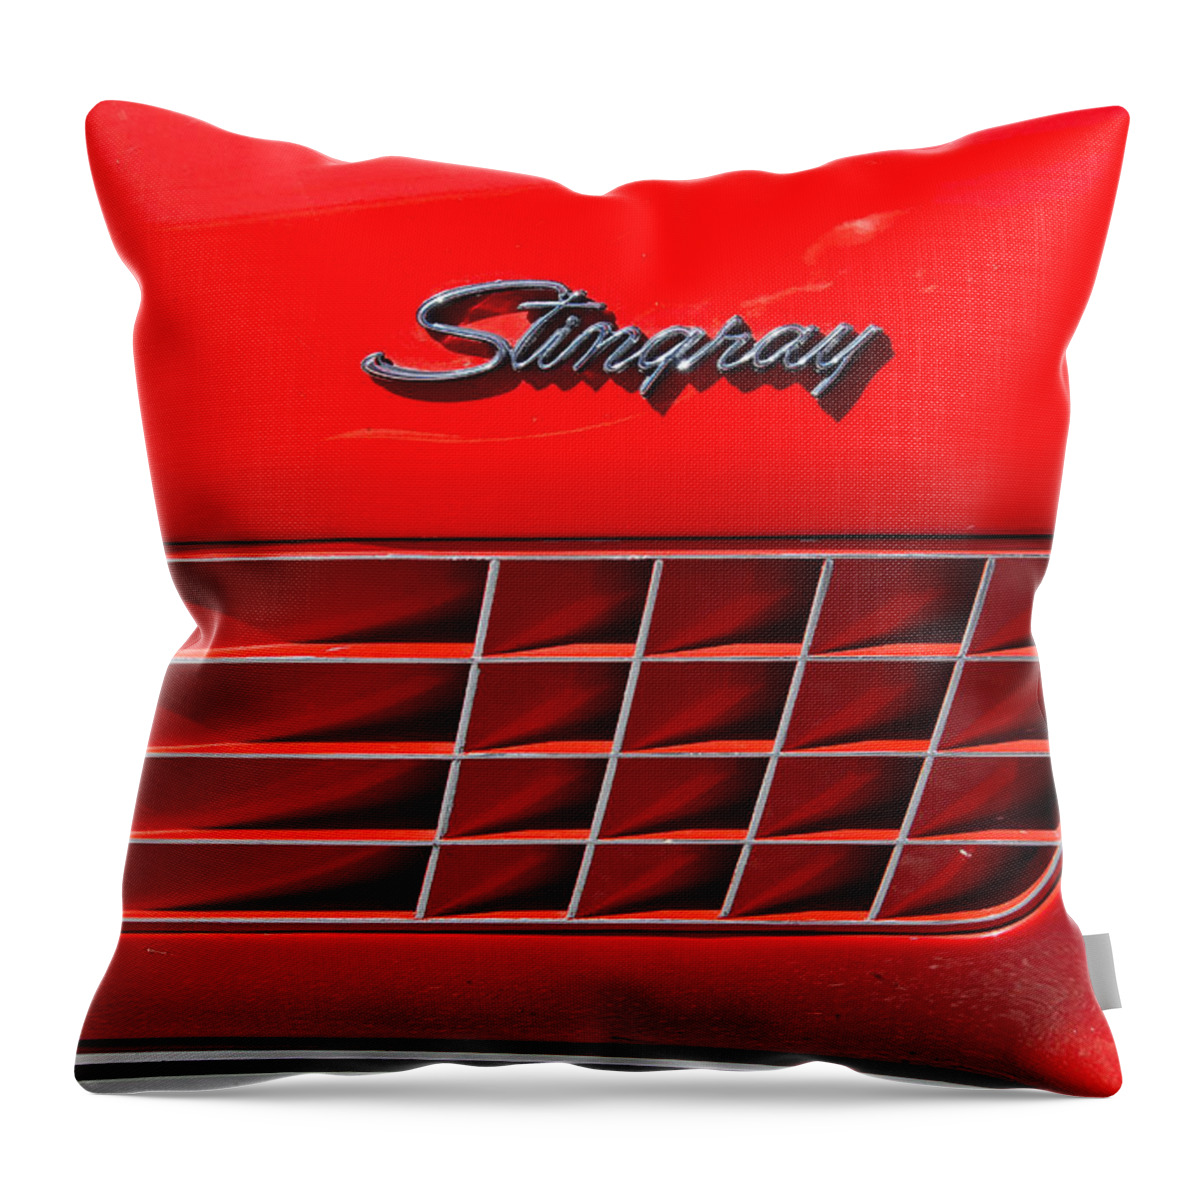 Automotive Details Throw Pillow featuring the photograph Stingray by John Schneider